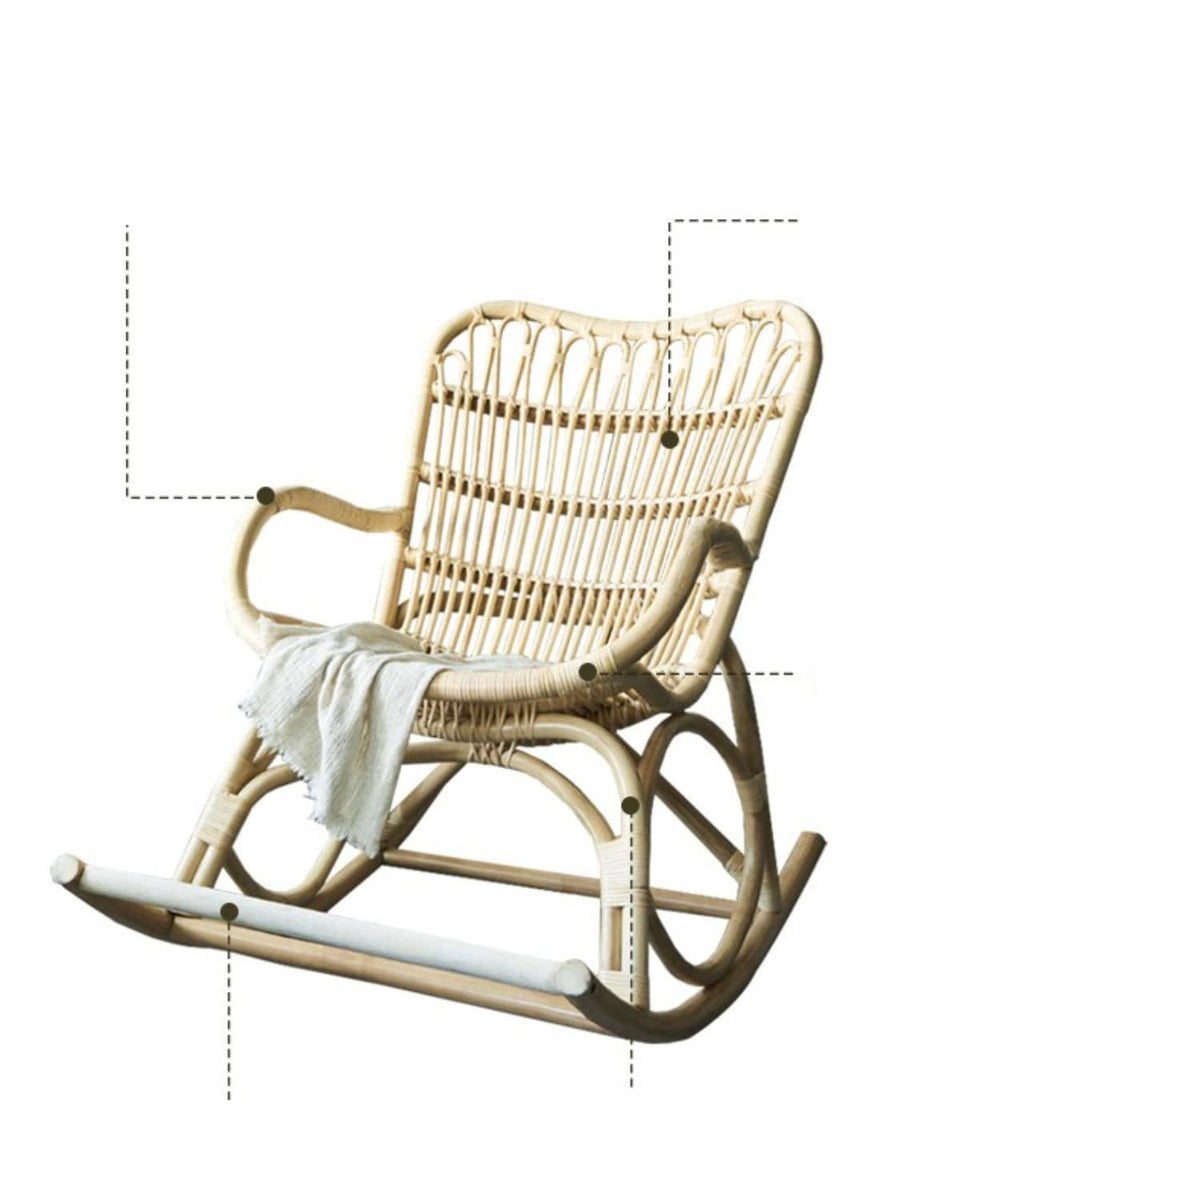 Natural Wood Rattan Chair - Stylish and Durable Seating for Your Home tzm-548